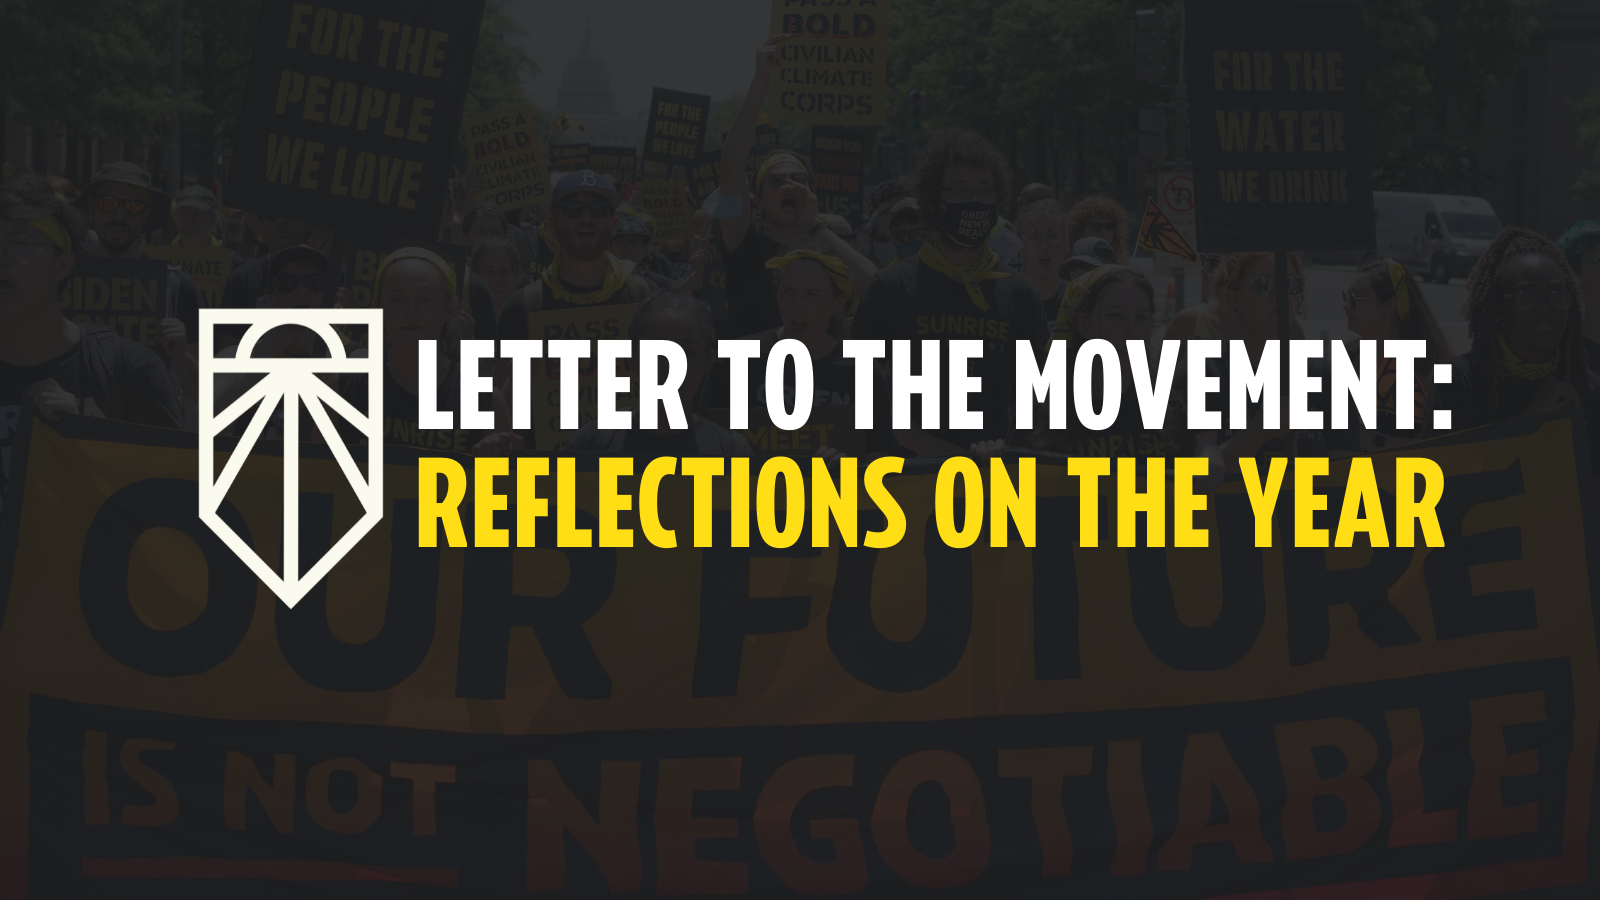 Letter to the Movement: Reflections on the Year. The State of Build Back Better.